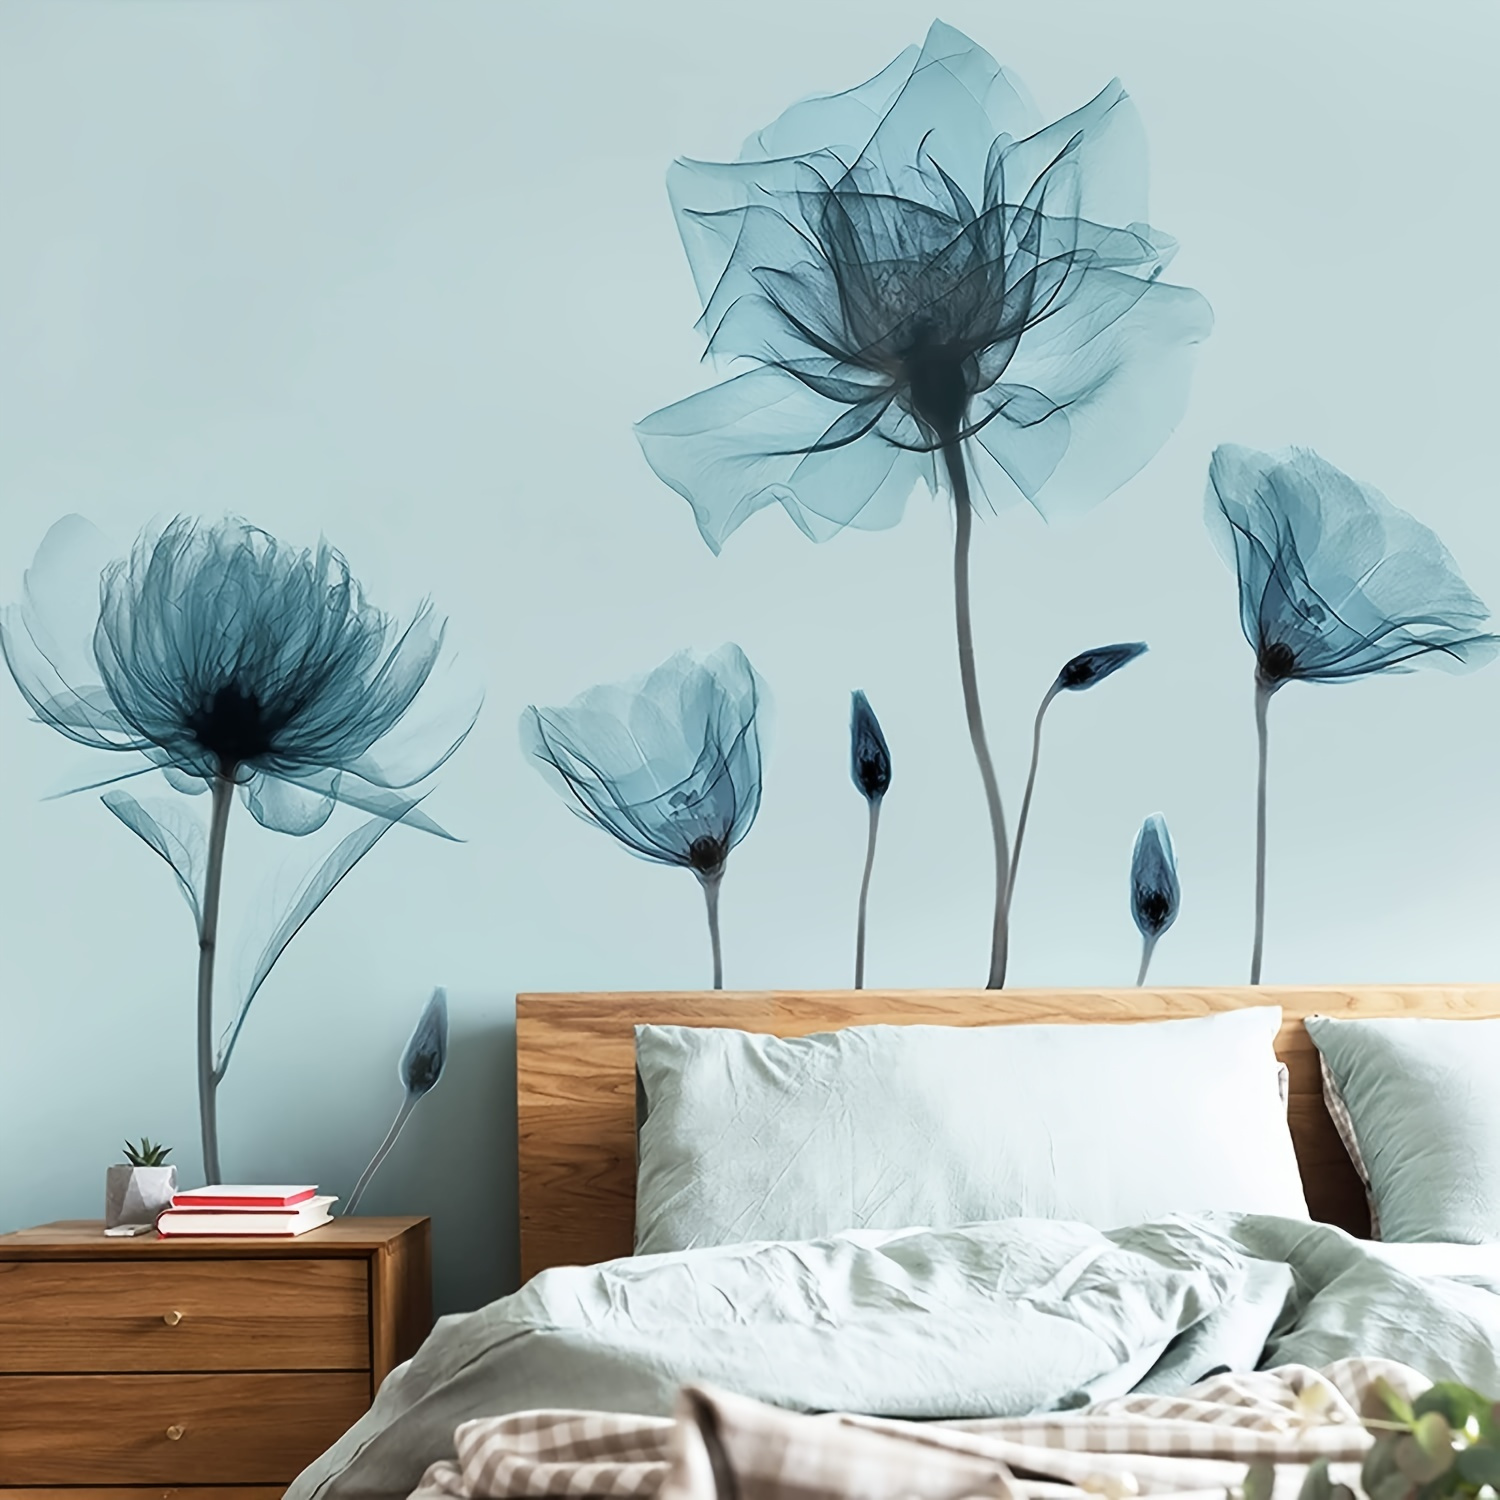 

1pc Blue Flower Wall Decals Wall Stickers, Peel And Stick Removable Decal Sticker, Diy Wall Art Murals Home Wall Decor For Bedroom Living Room Classroom Office Wall Decoration